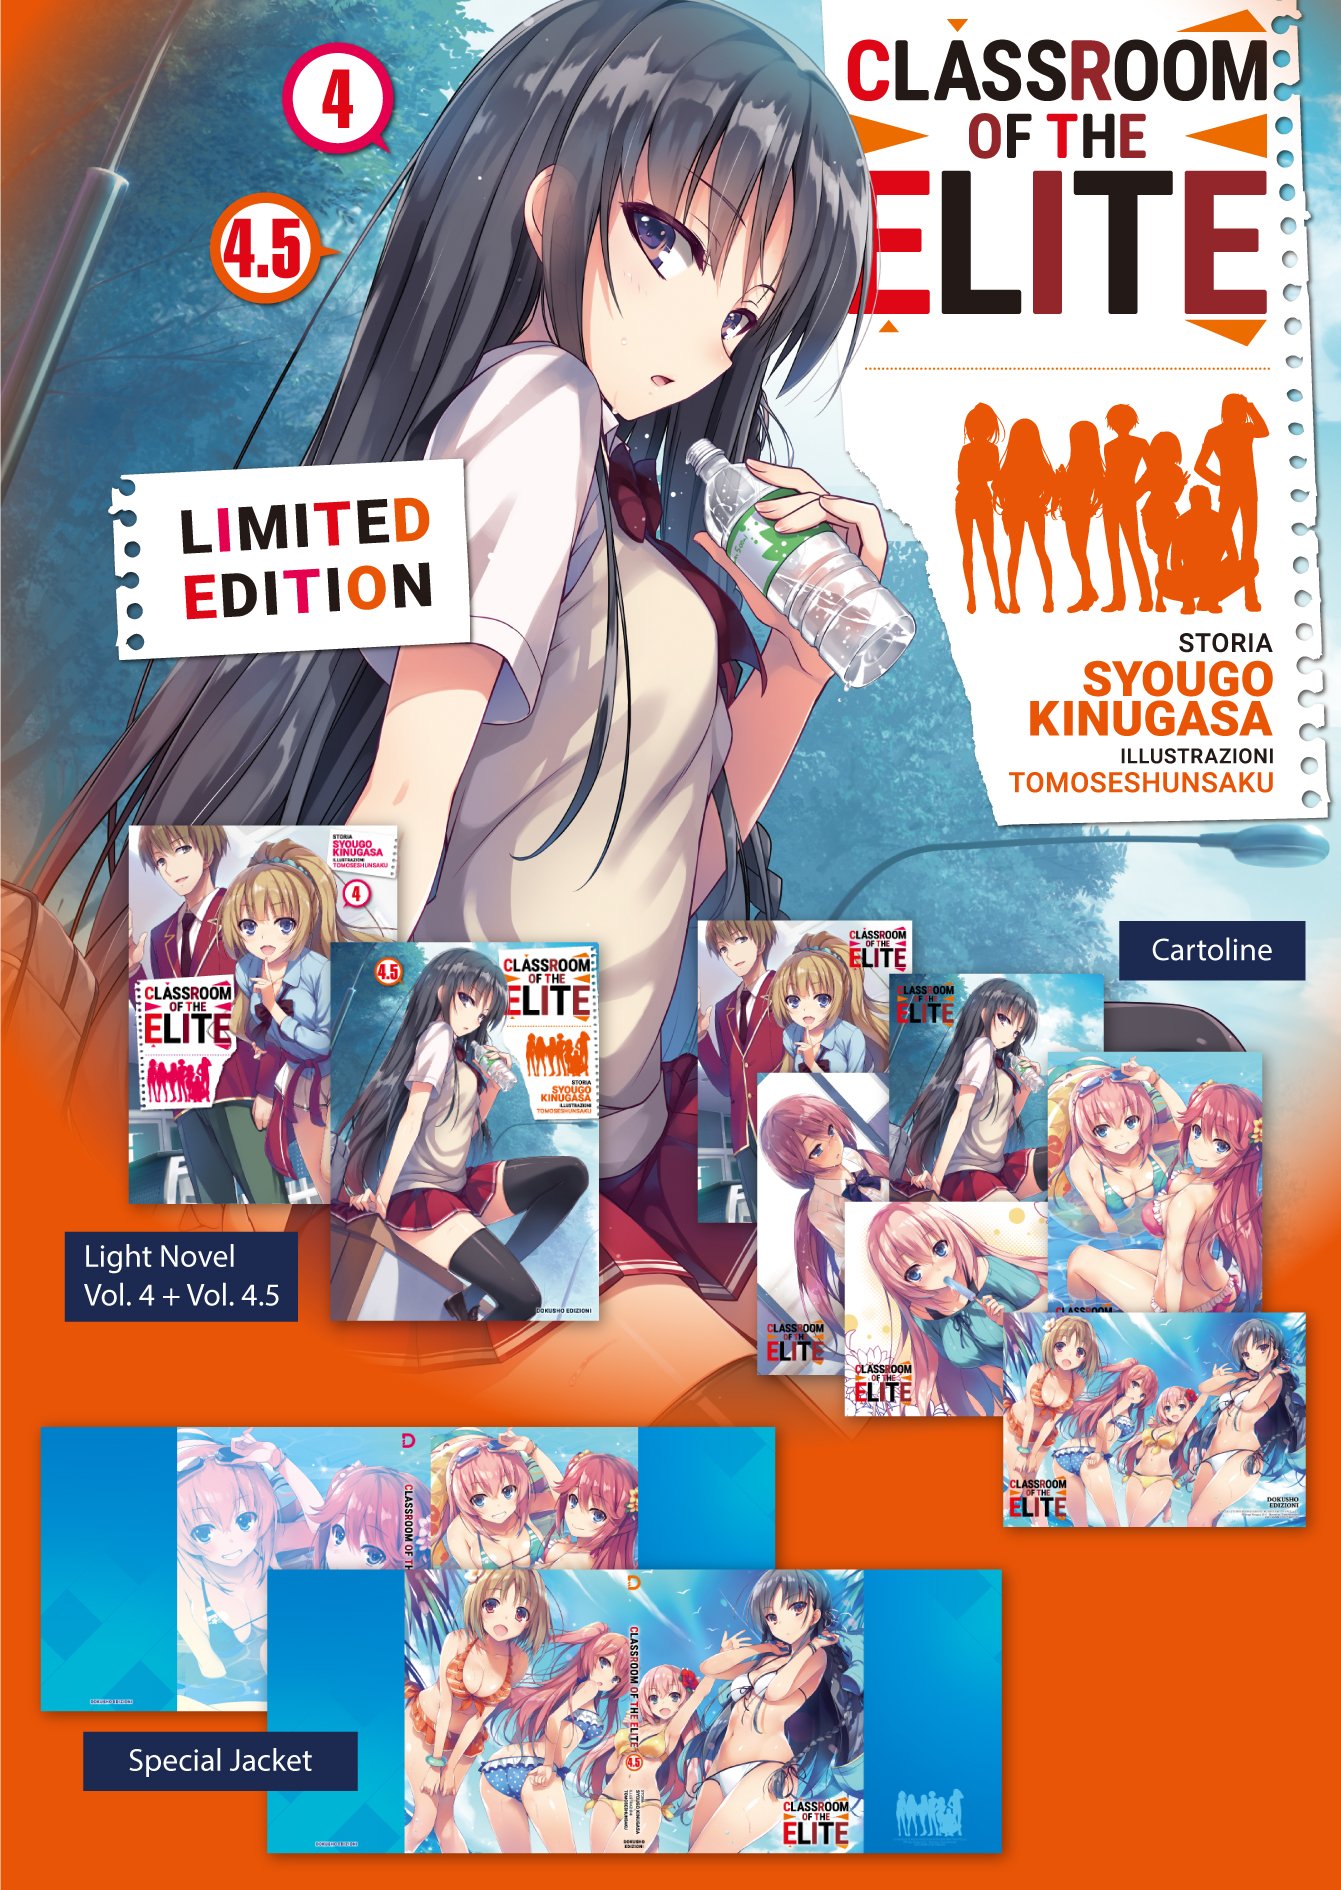 Classroom of the Elite, Vol. 4 & 4.5 - LIMITED EDITION